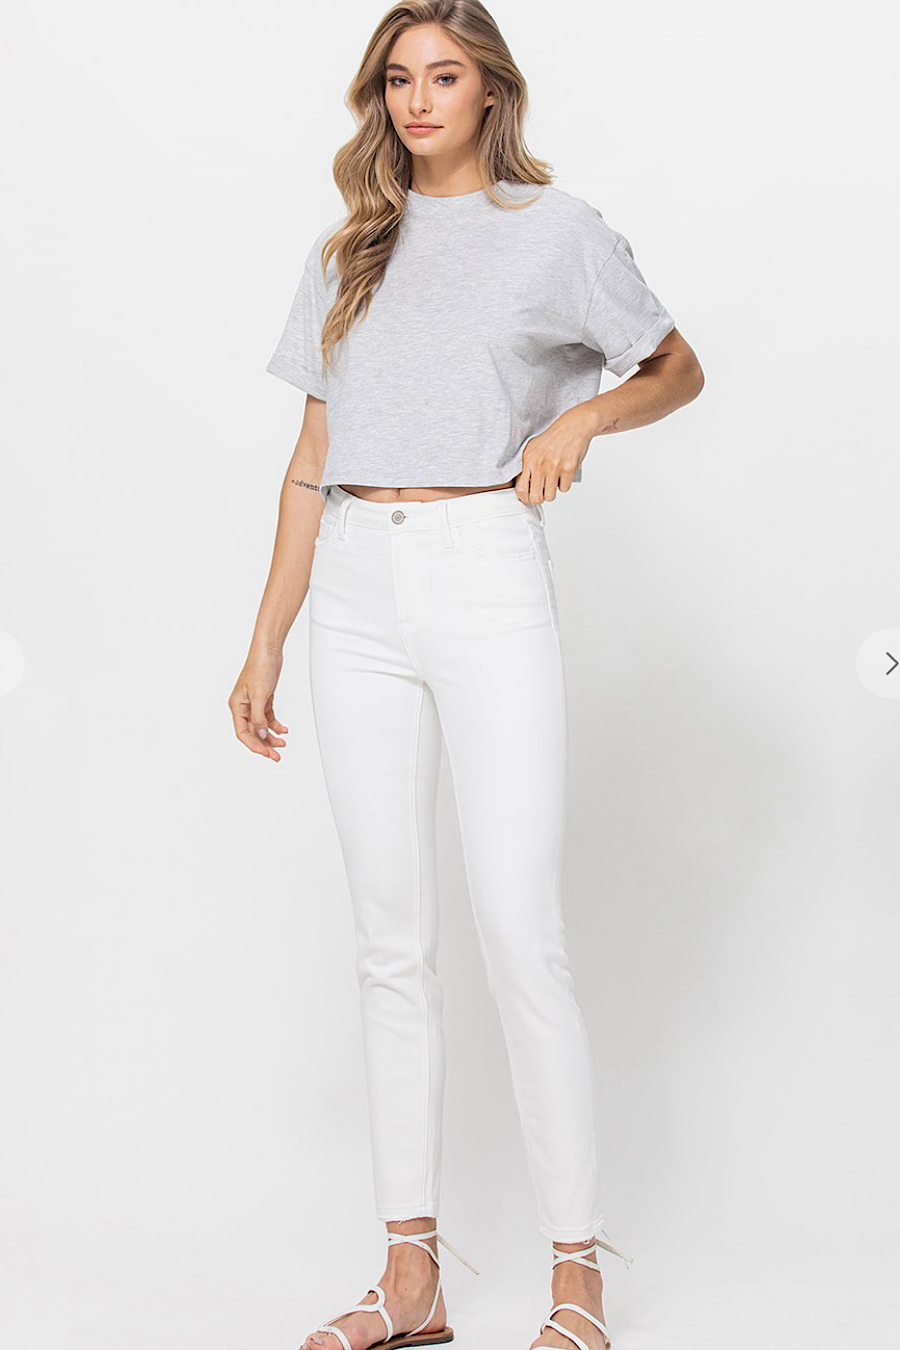 Contentment Skinny Jeans in White